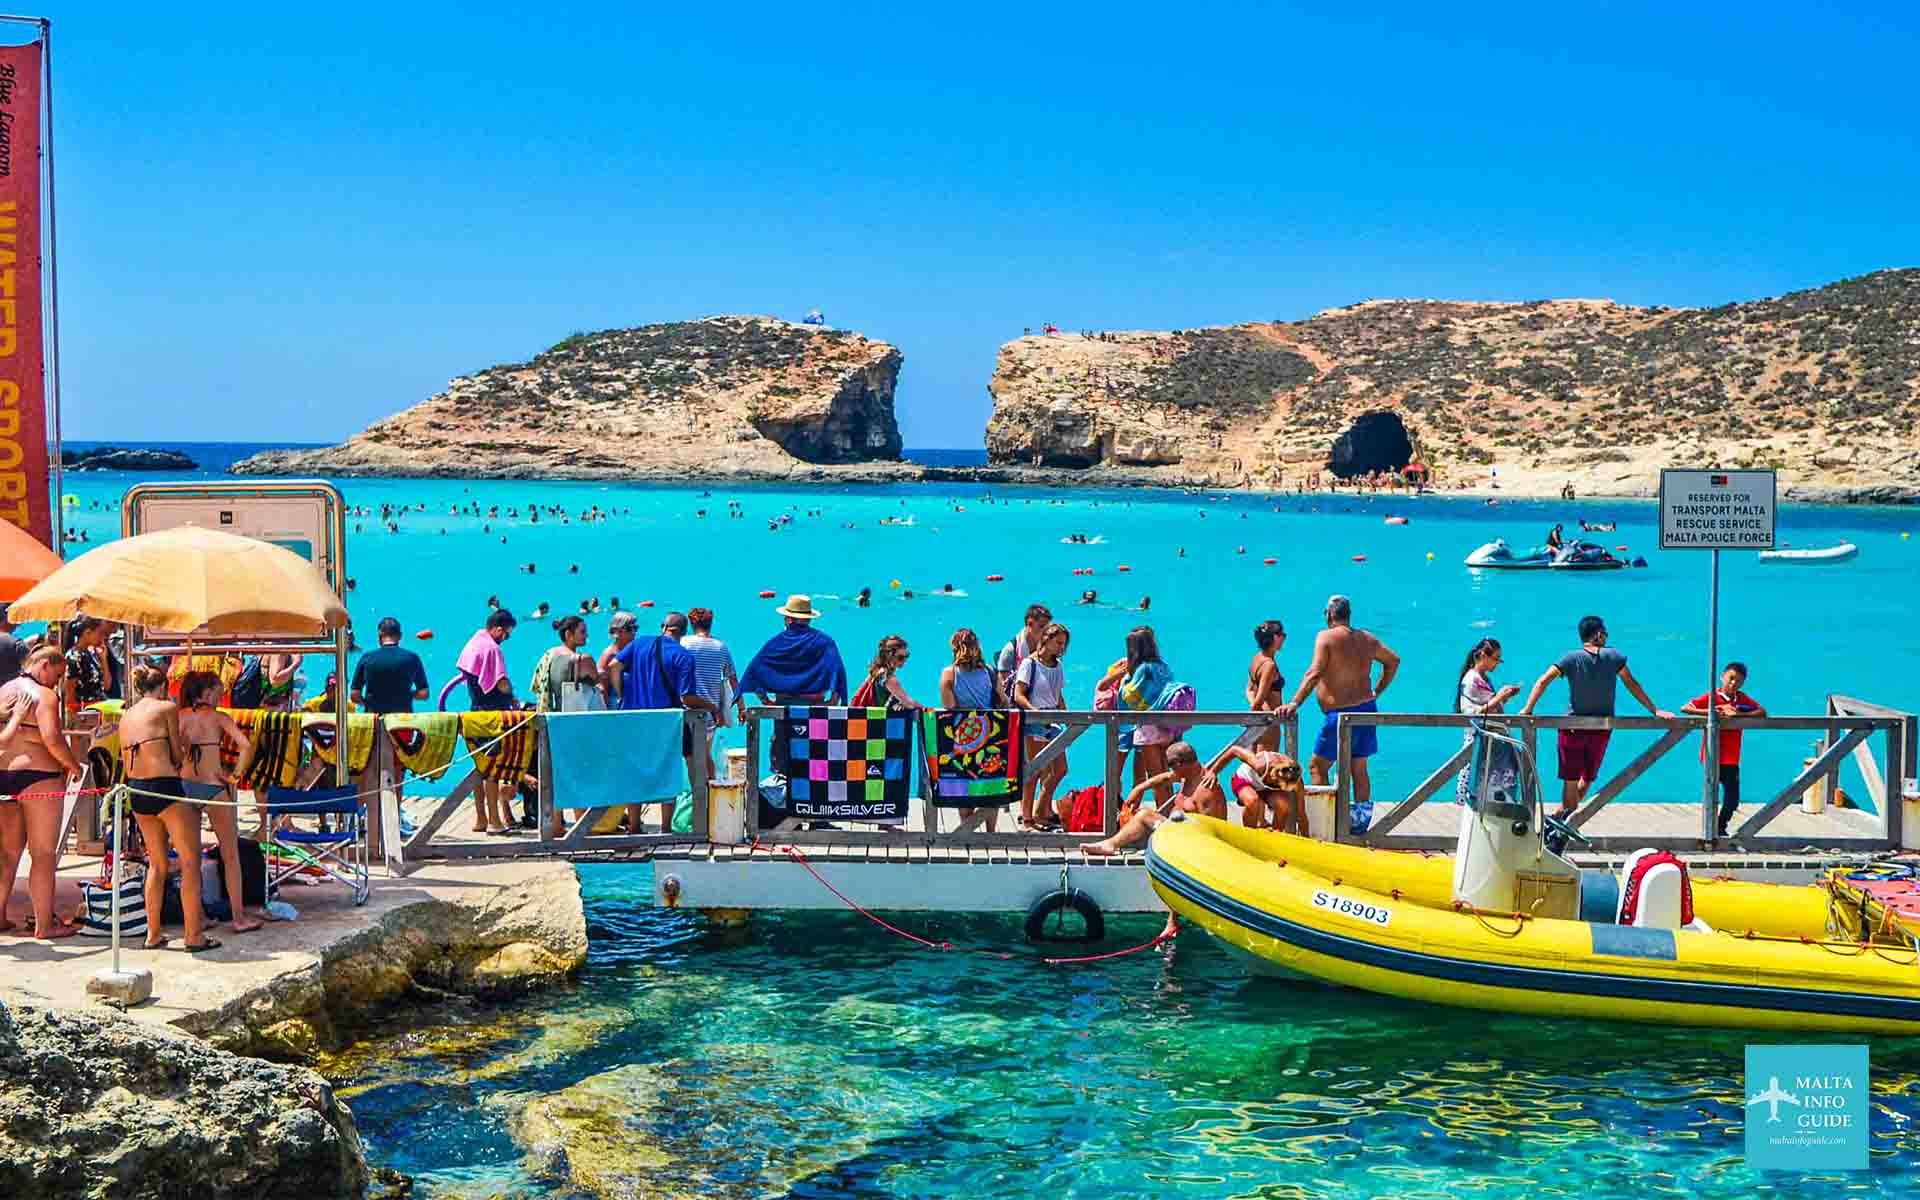 People standing on a deck at Comino overlooking Blue Lagoon Malta and Cominotto.